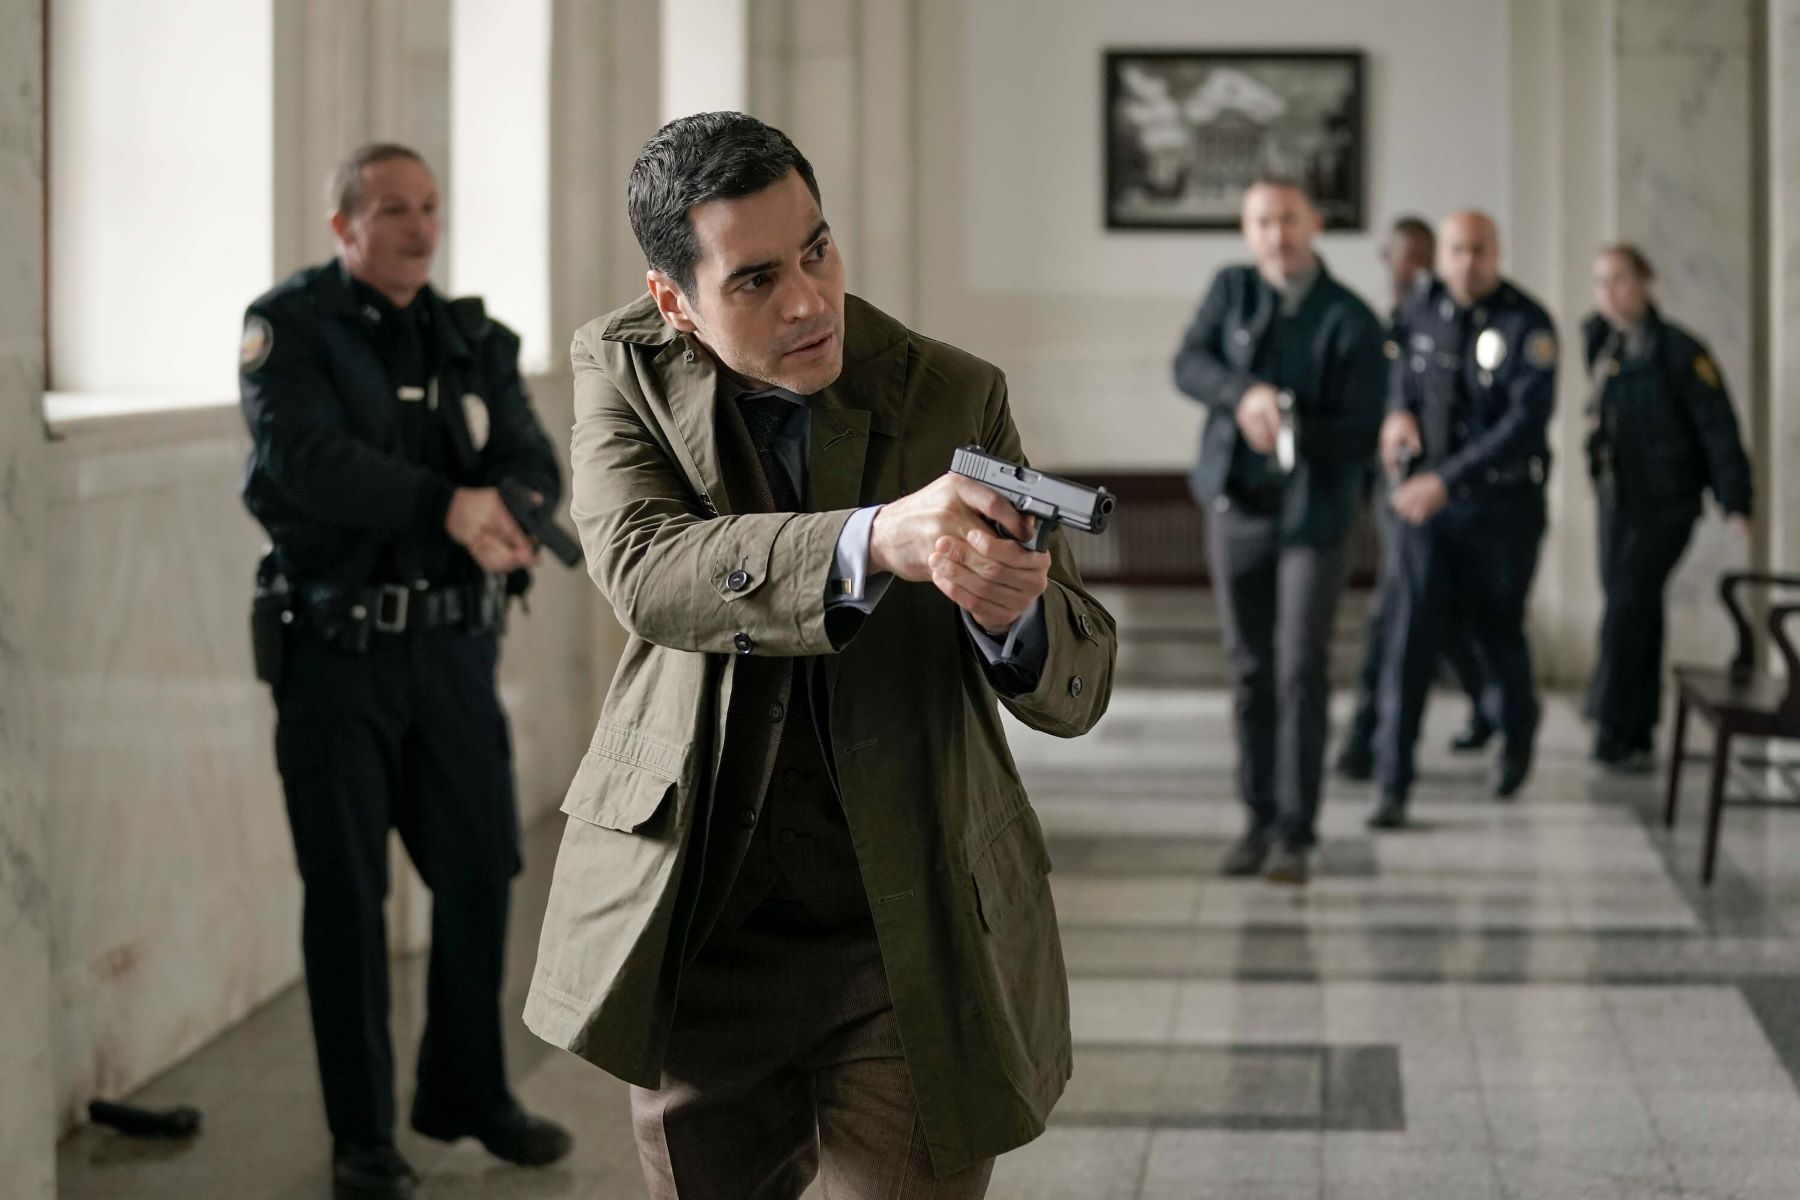 Ramón Rodríguez, in character as Will Trent in 'Will Trent' Season 1 Episode 9, 'Manhunt,' wears a dark green jacket over a gray three-piece suit while wielding a gun.